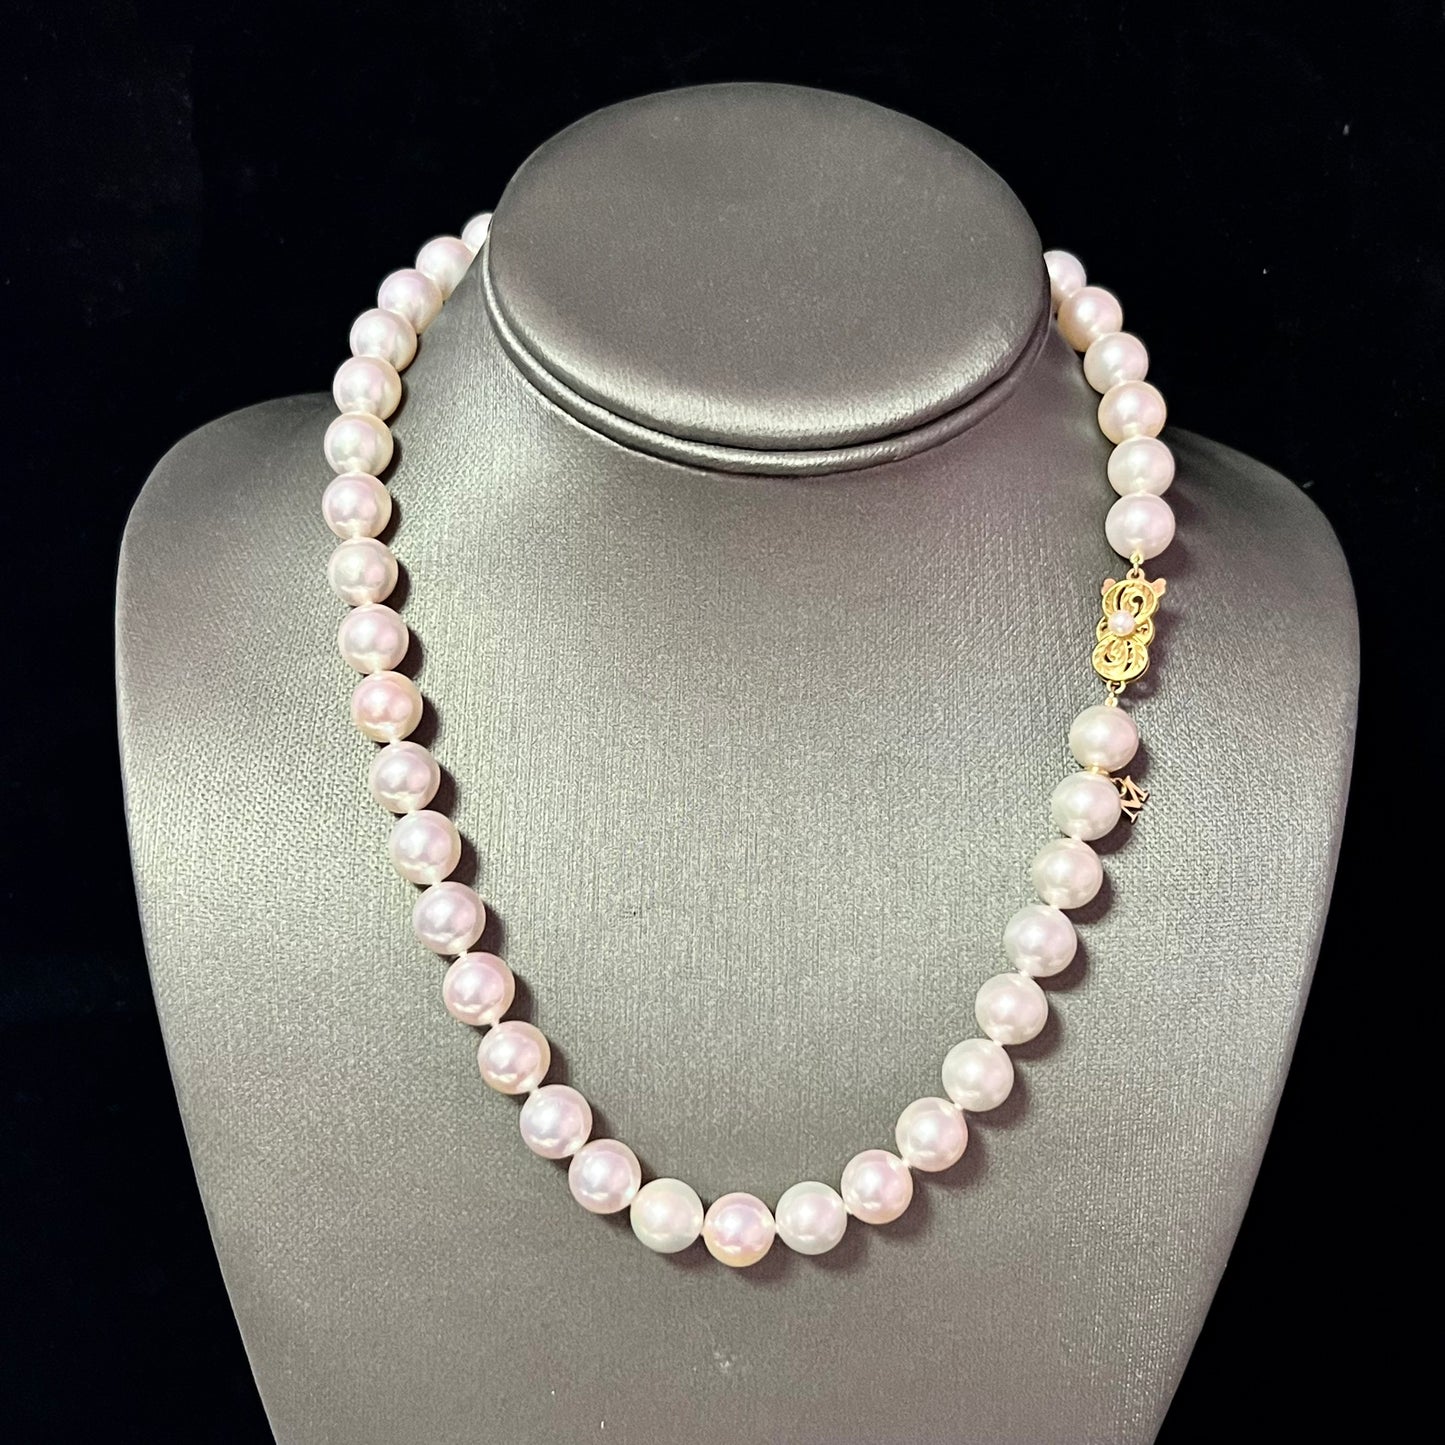 Mikimoto Estate Akoya Pearl Necklace 18" 18k Y Gold 10 mm Certified $106,000 M106000